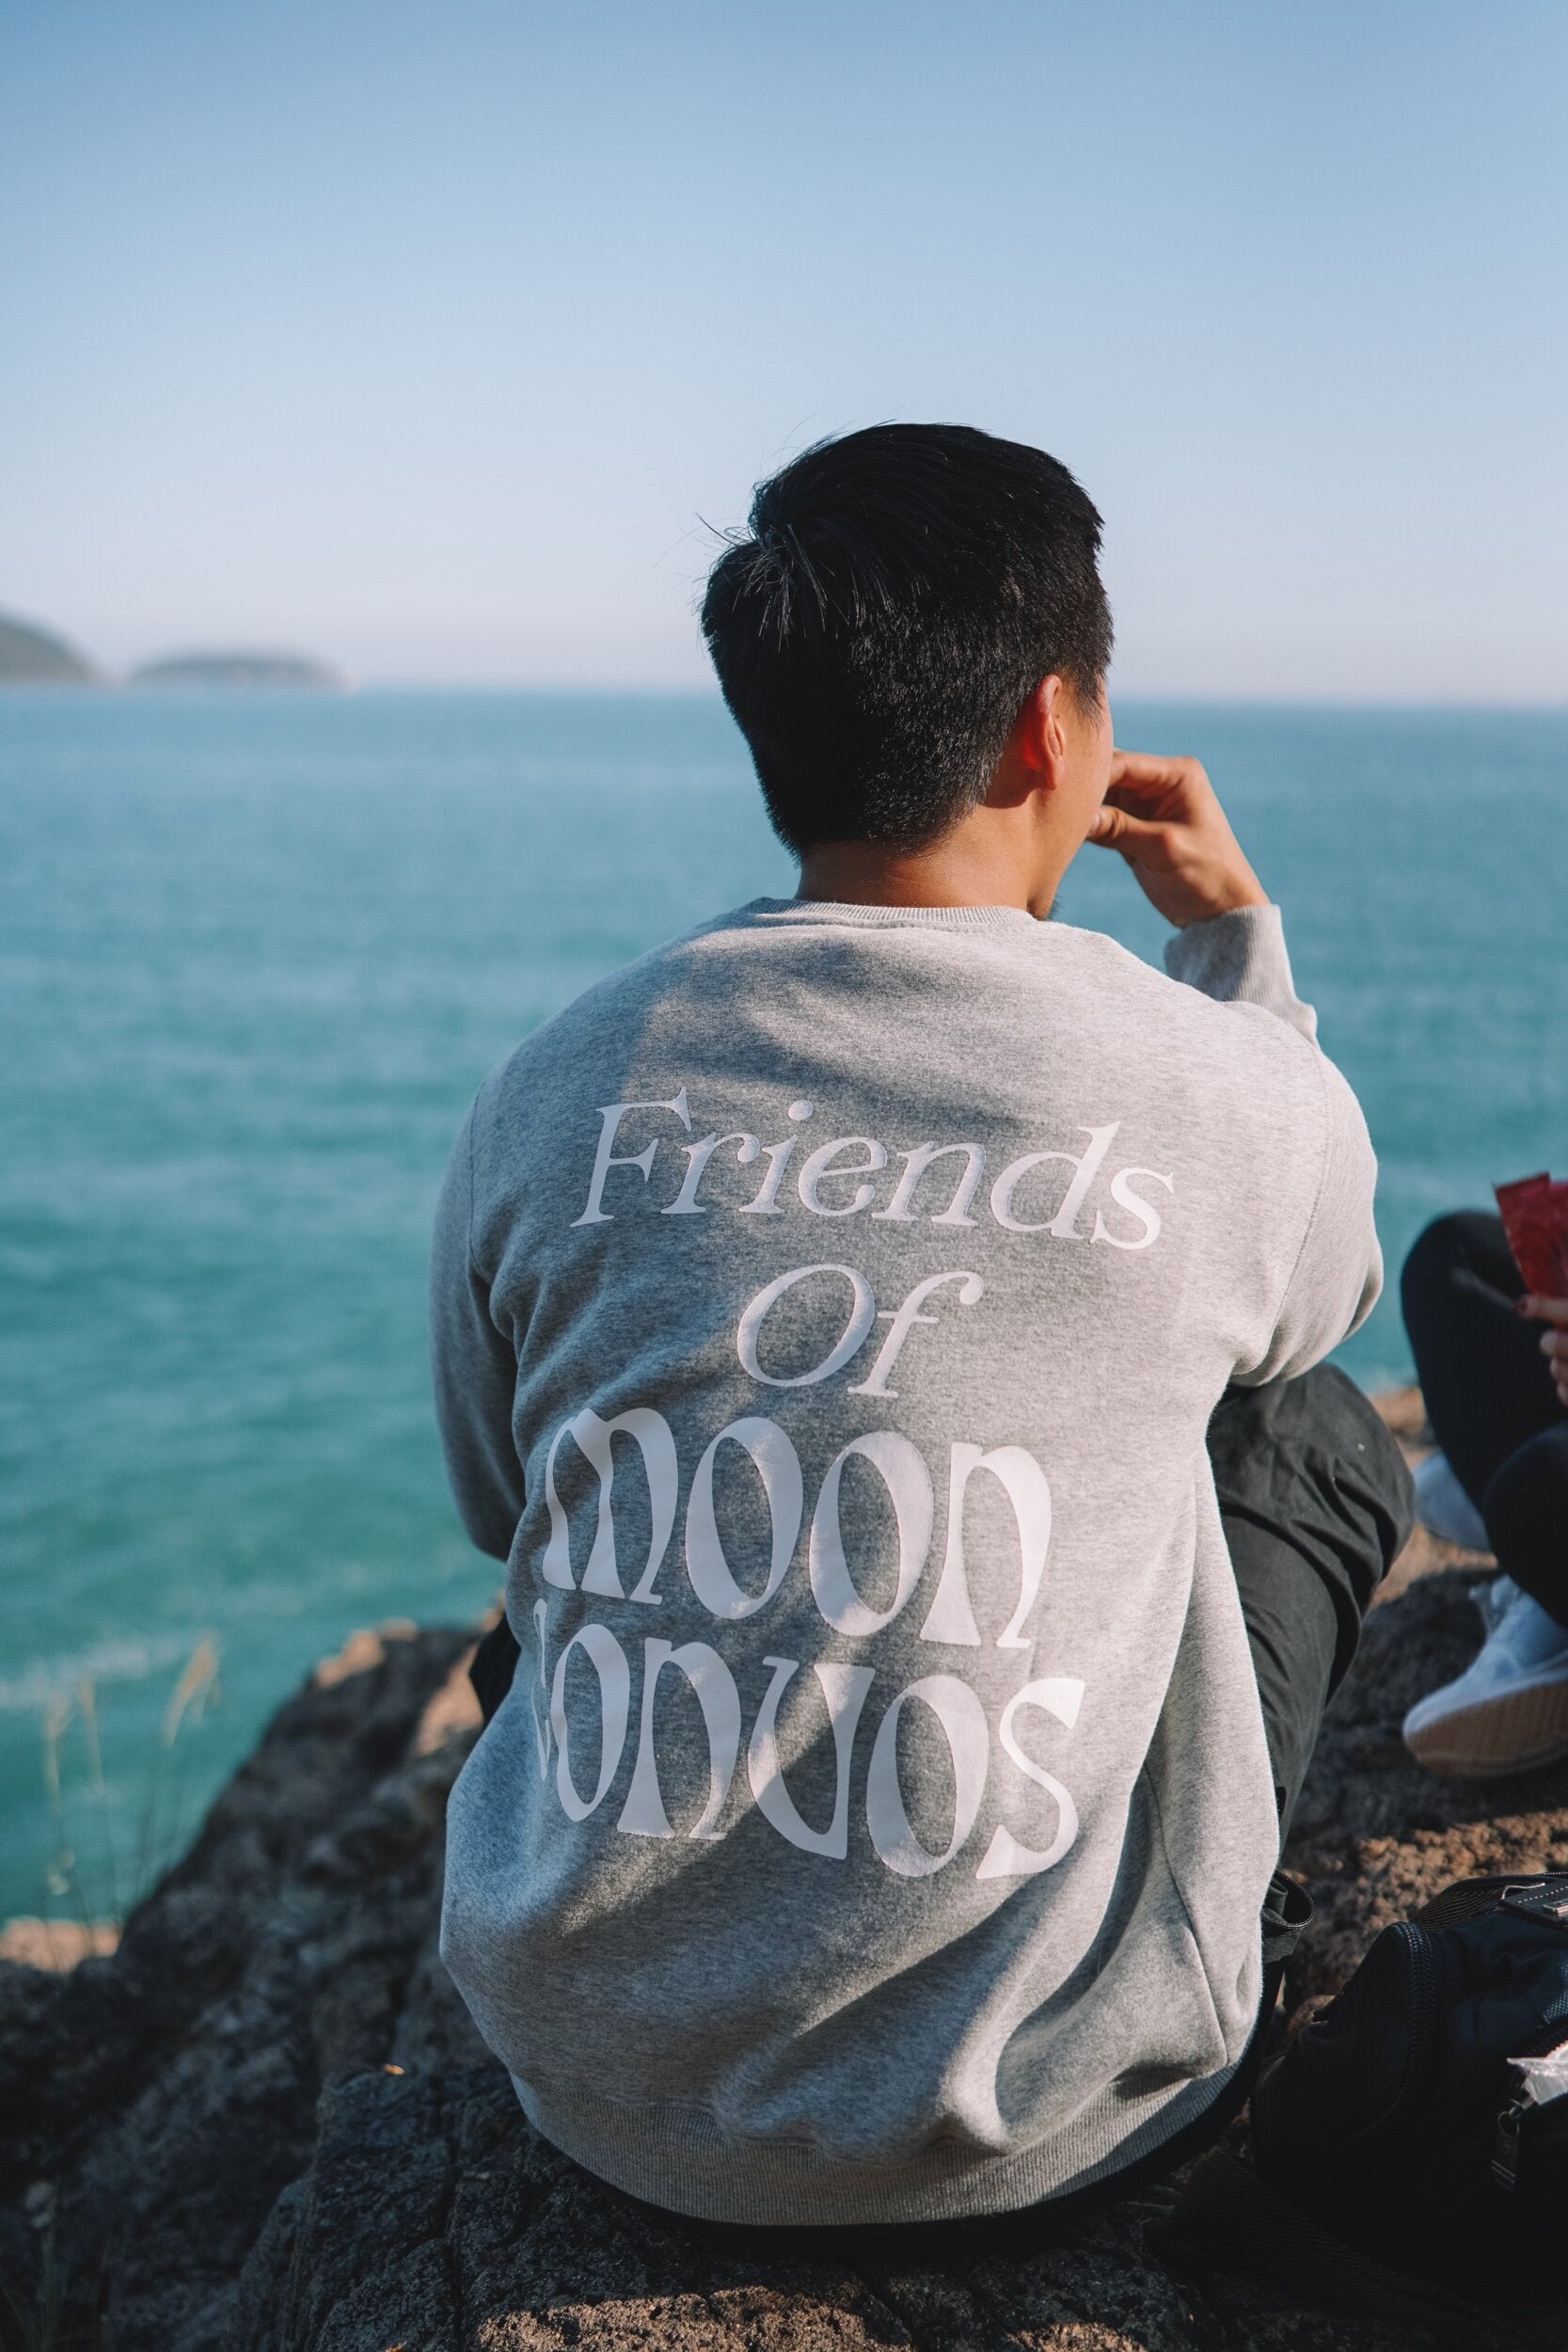 Friends Of Moon Convos Sweater (Grey)